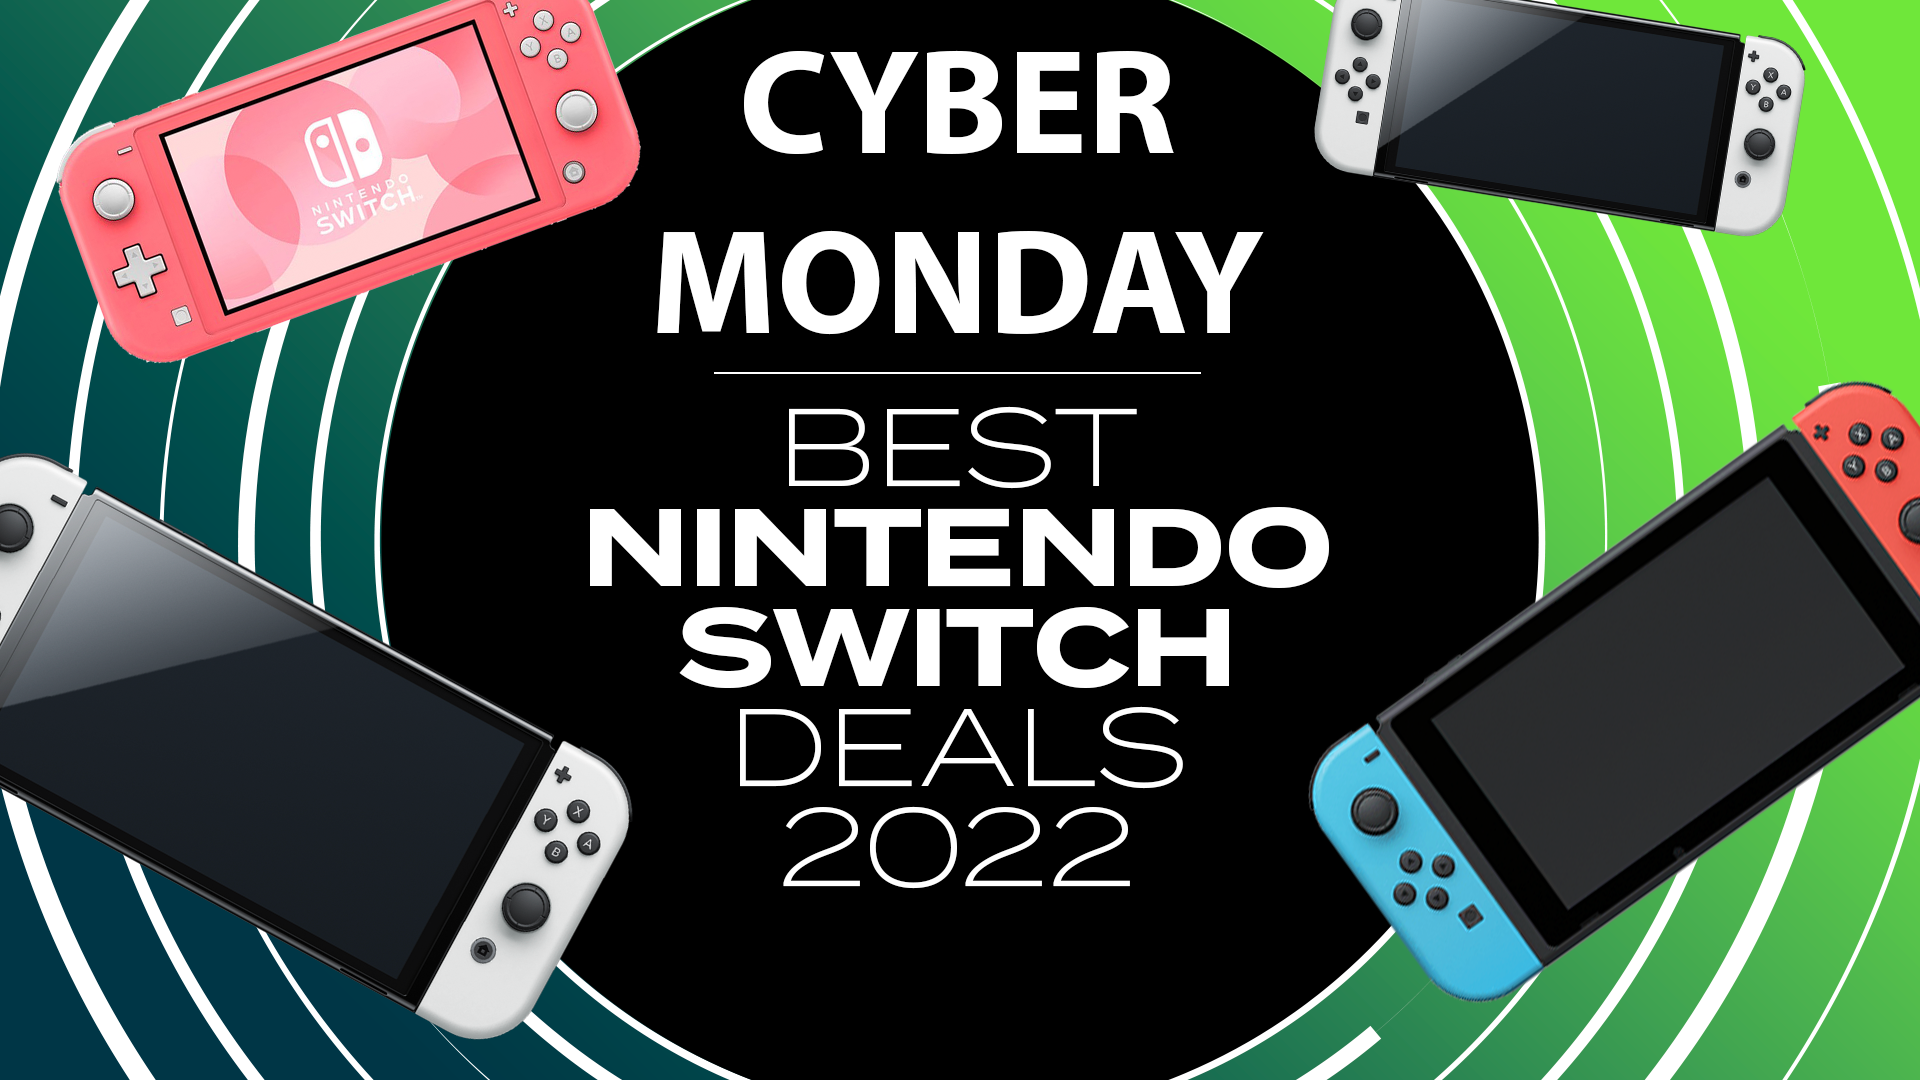 Nintendo Switch Cyber Monday deals 2022: all the best offers LIVE |  